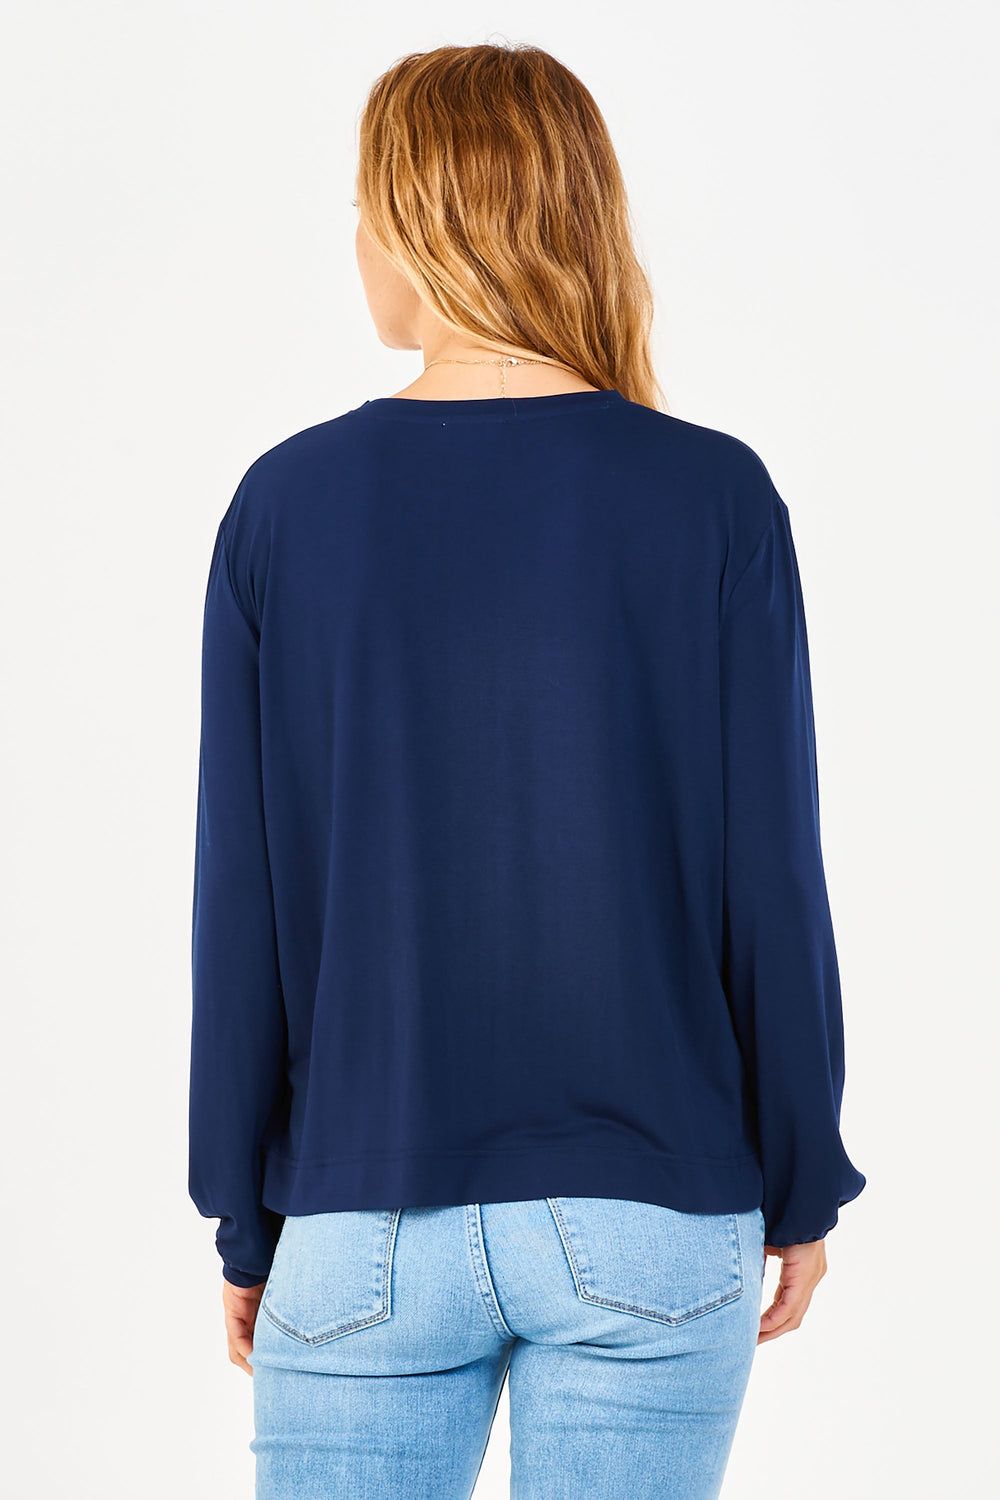 image of a female model wearing a MATILDA BASIC LONG SLEEVE TOP ECLIPSE TOPS